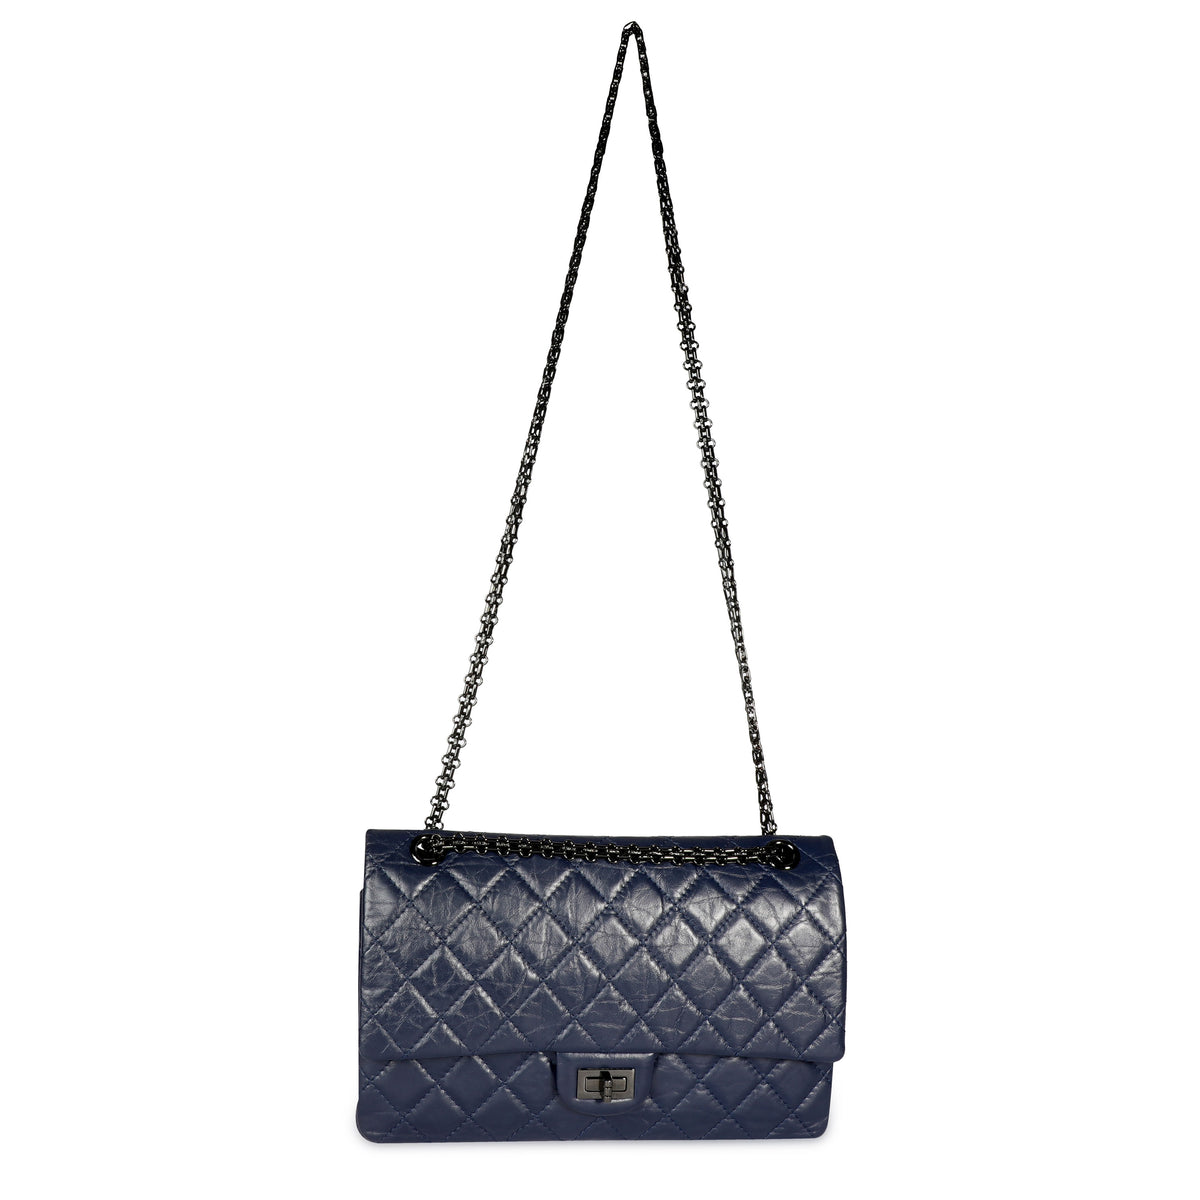 CHANEL Metallic Navy Blue Quilted Leather Maxi Reissue 2.55 Classic 227  Flap Bag